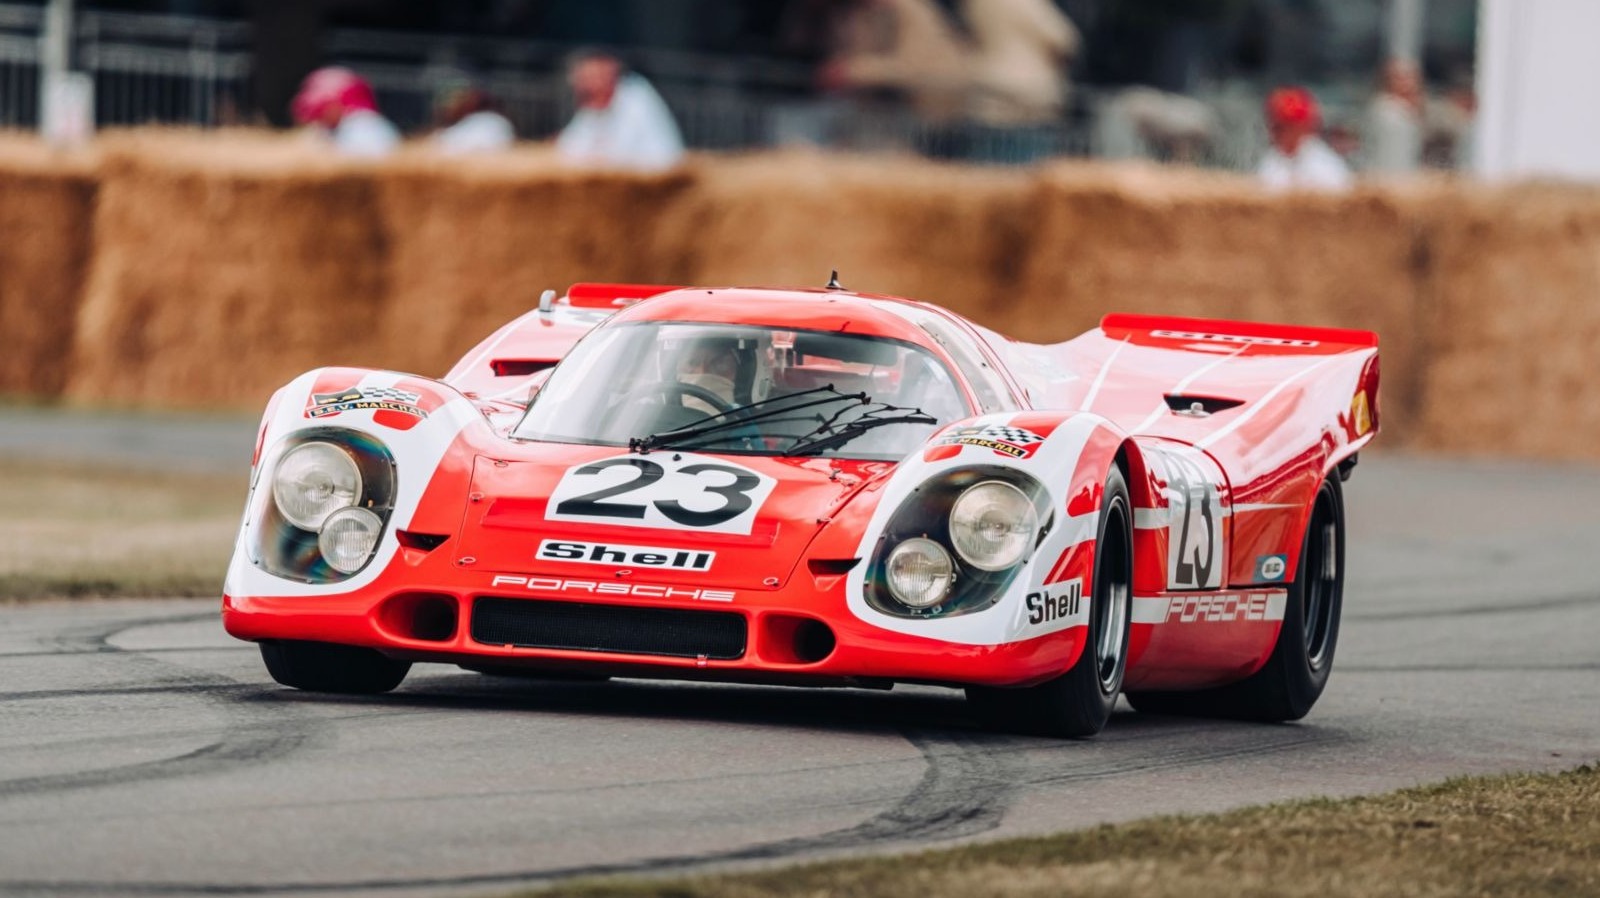 5 Of The Most Expensive Porsches Ever Sold At Auction And Why They Are So Valuable